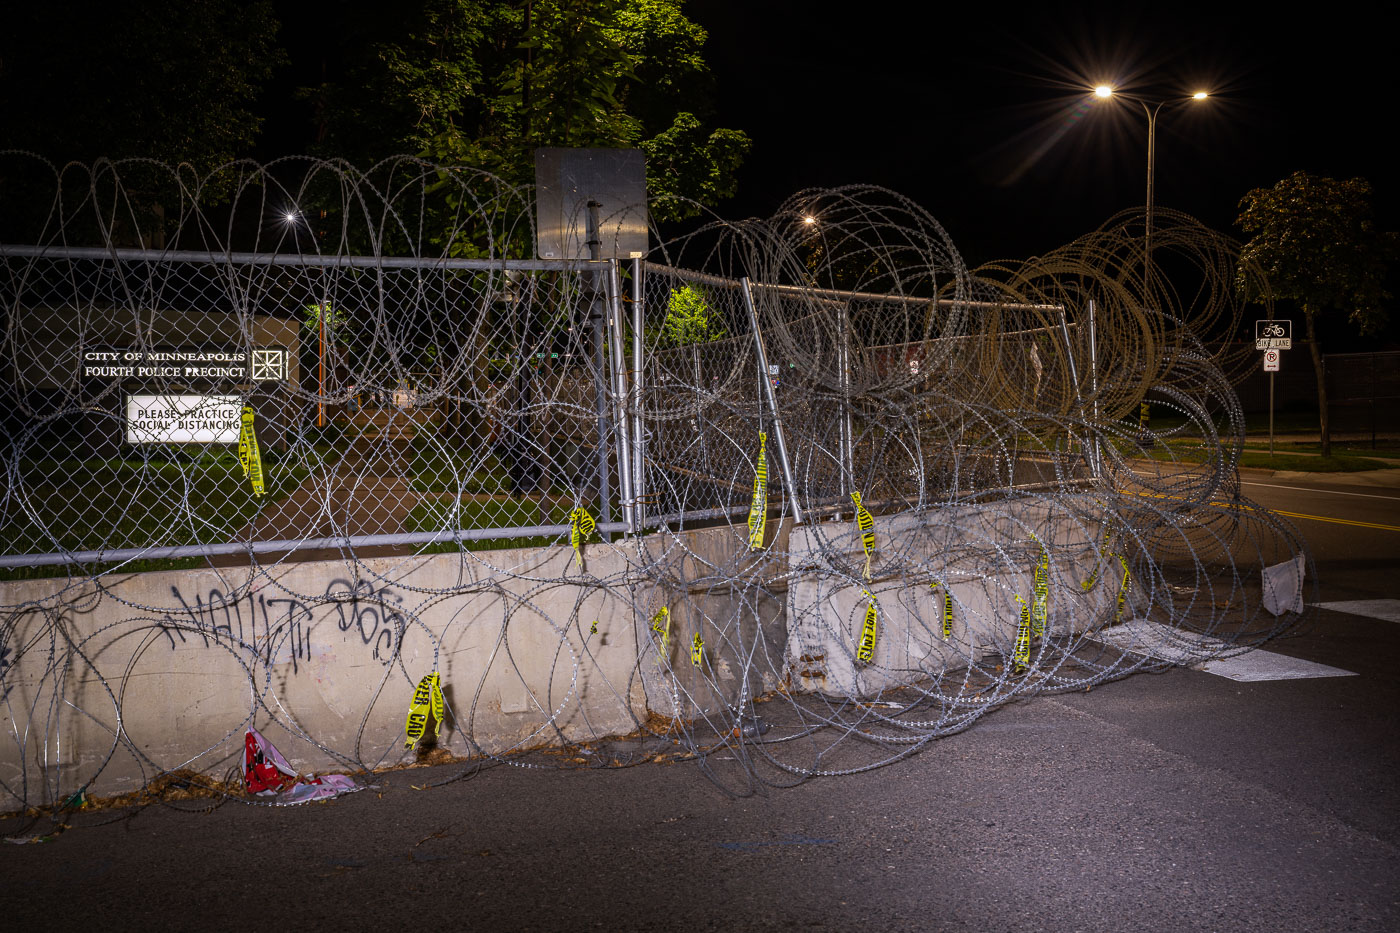 Razor wire and barricades surrounding police station